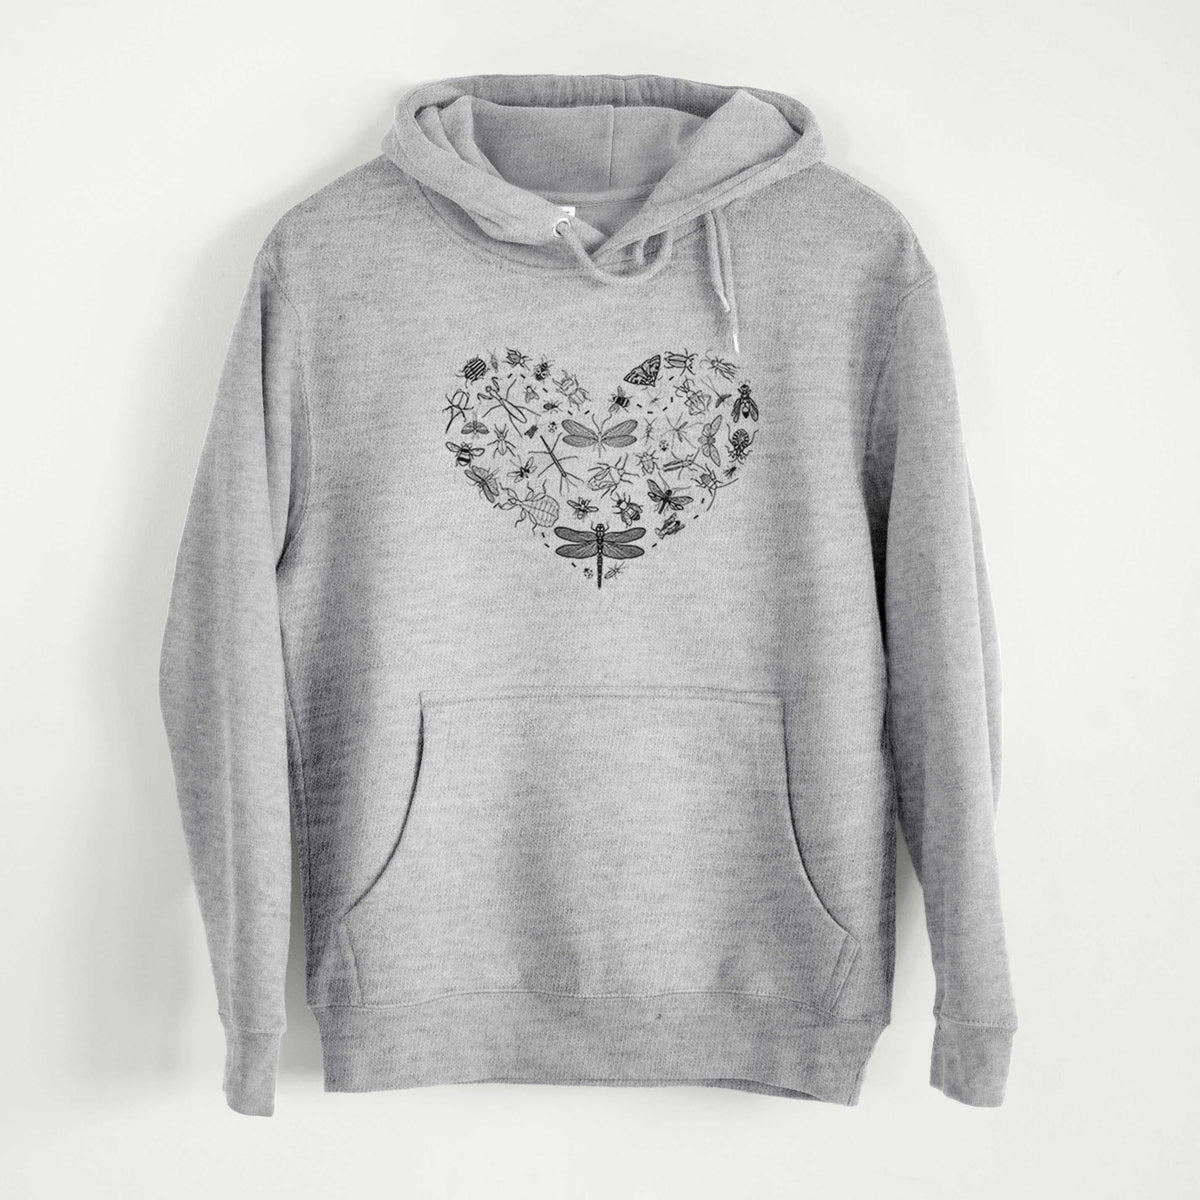 Heart Full of Insects  - Mid-Weight Unisex Premium Blend Hoodie